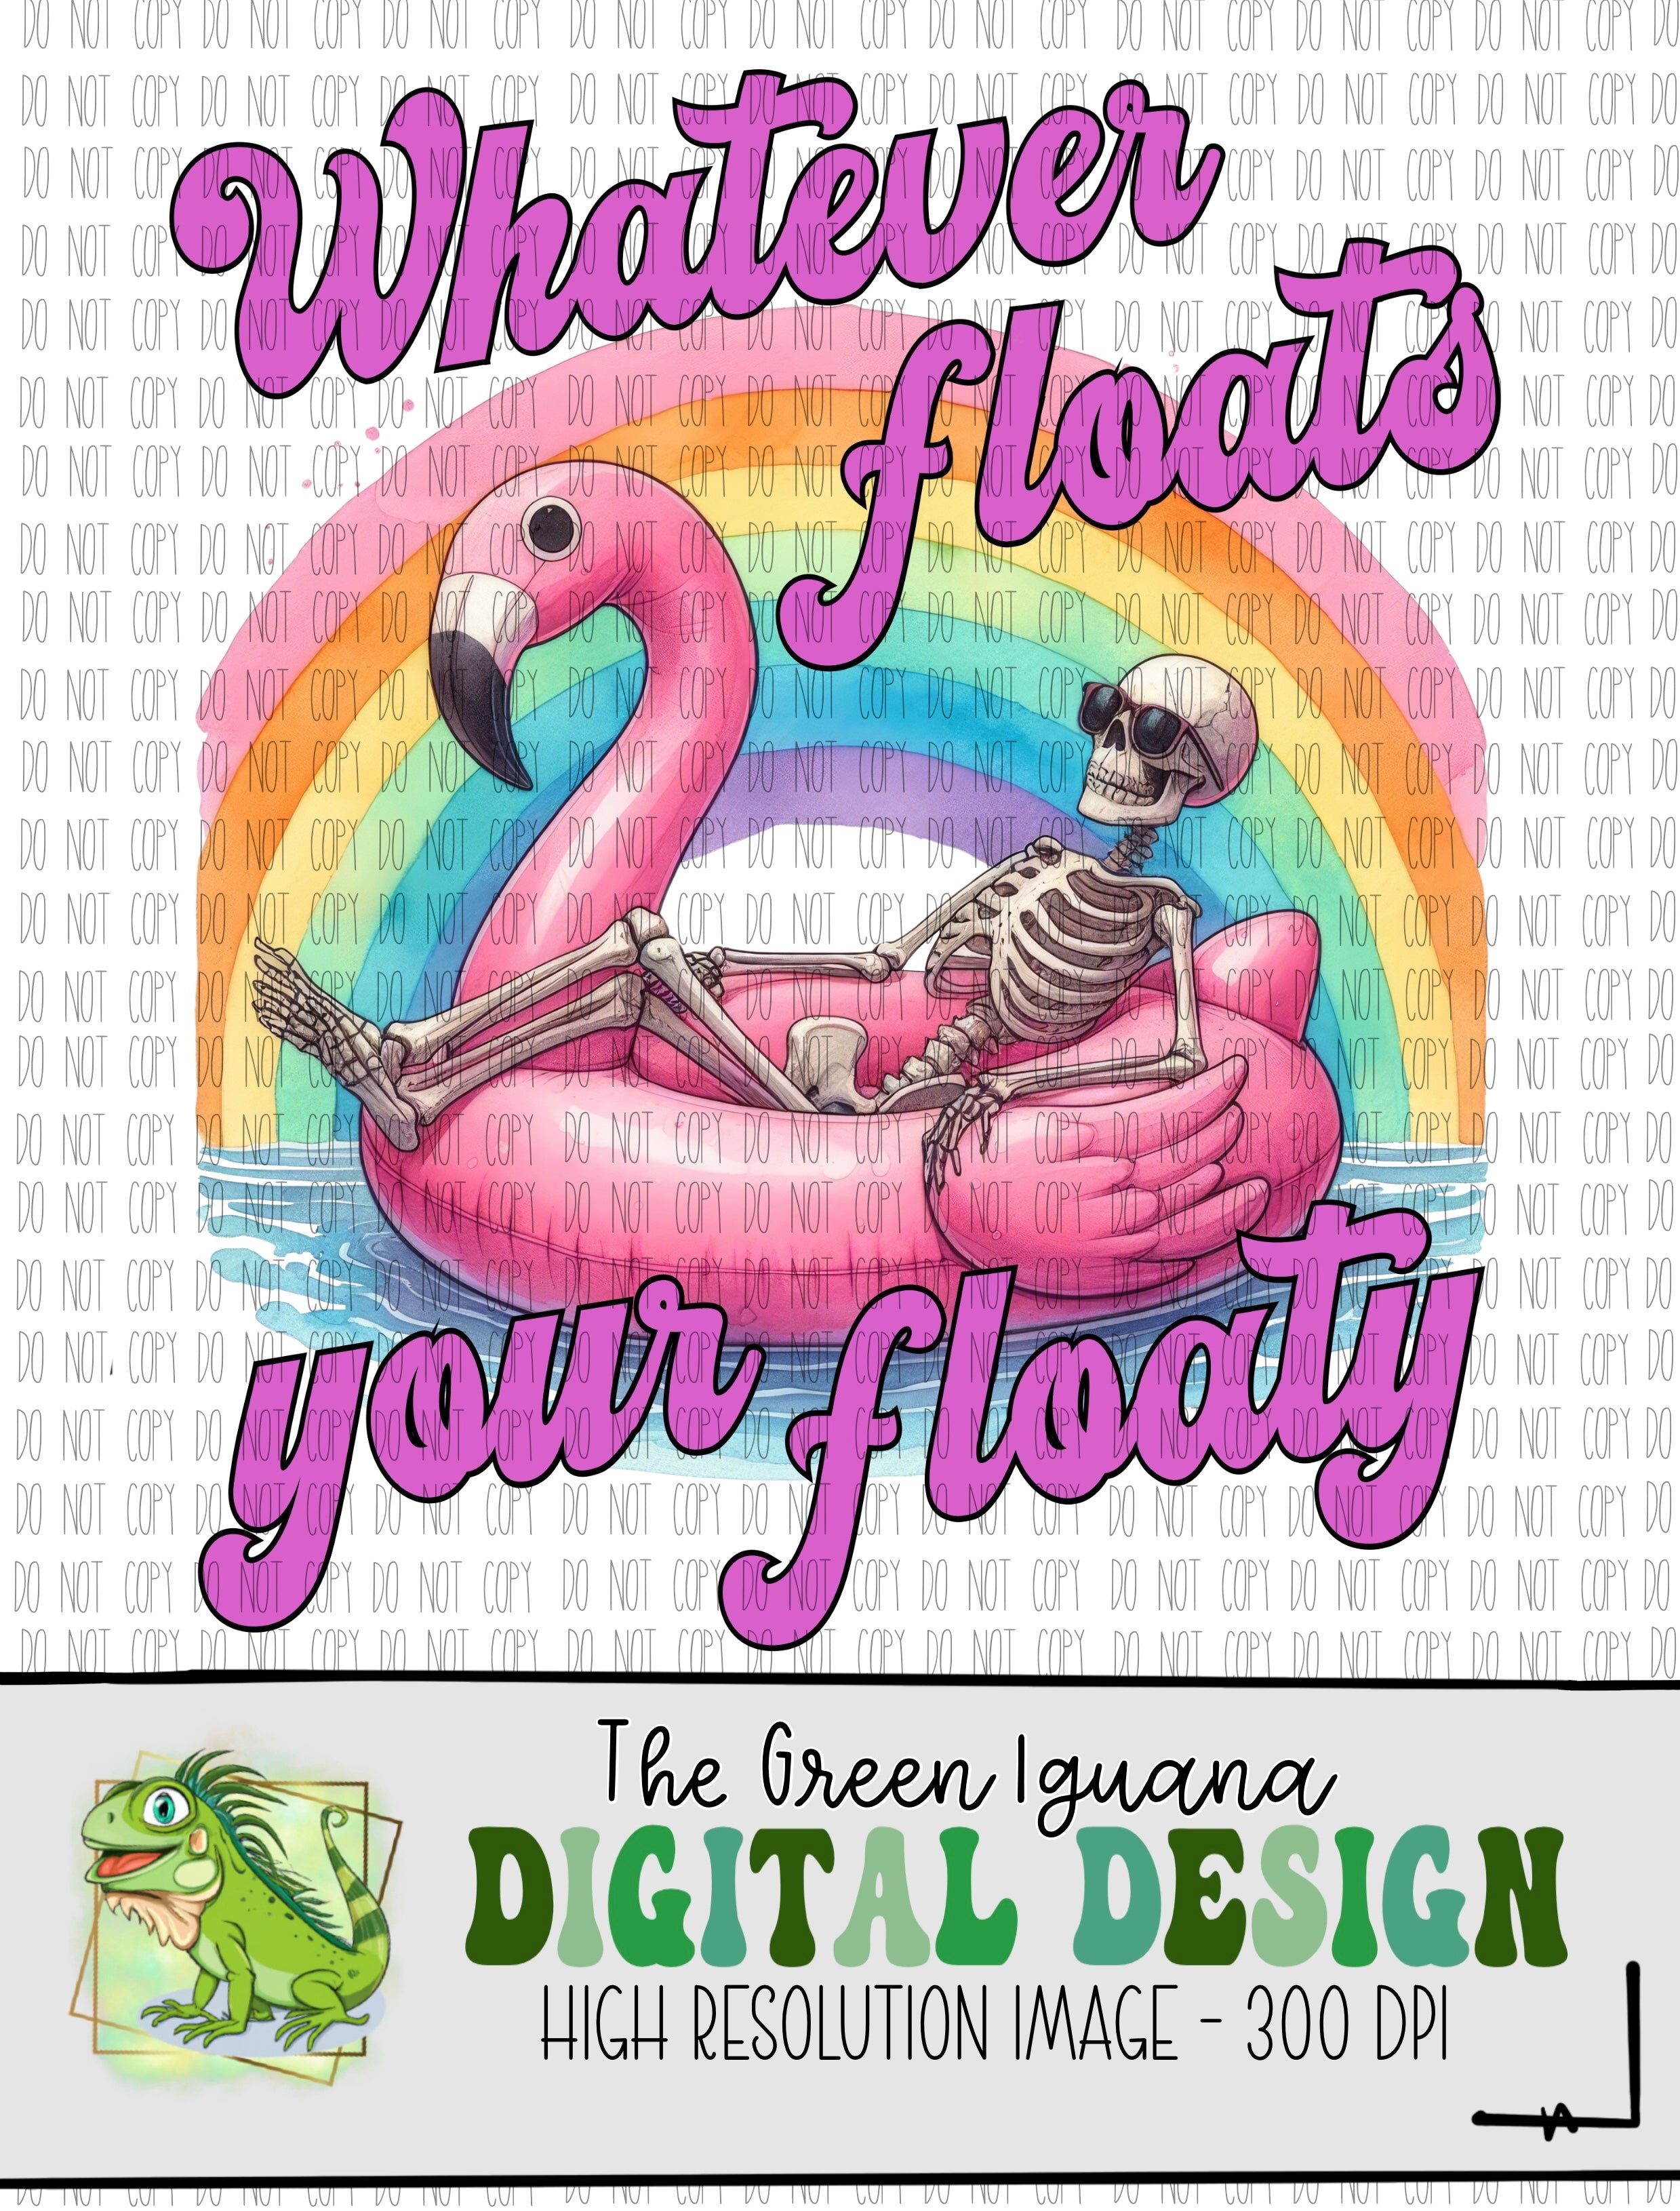 Whatever floats your floaty - DIGITAL